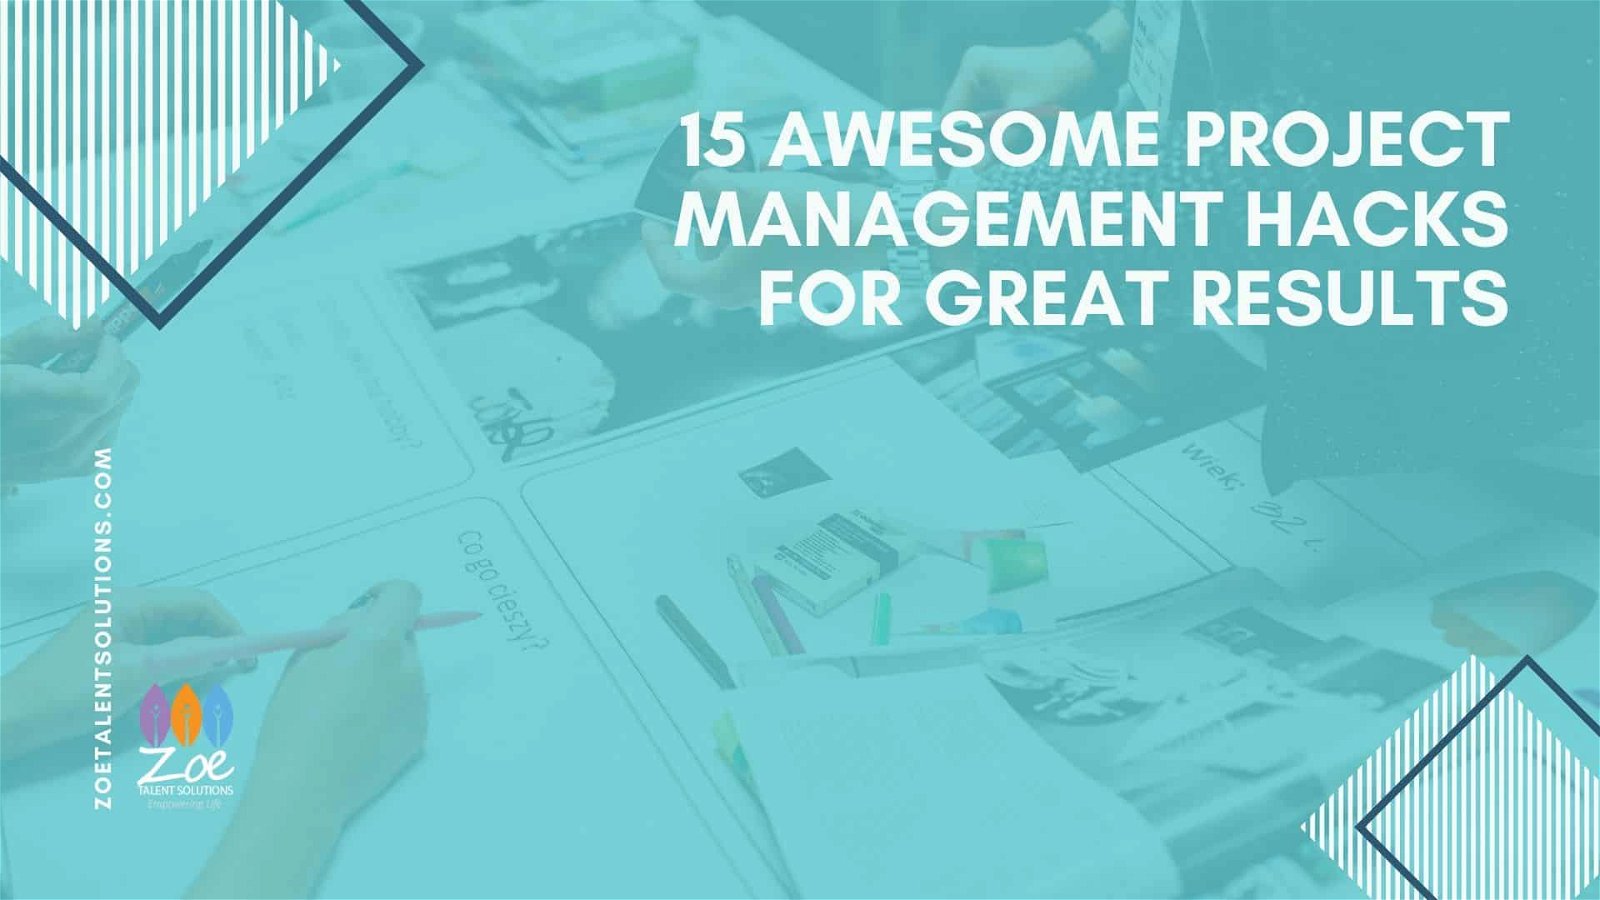 15 Awesome Project Management Hacks for Great Results